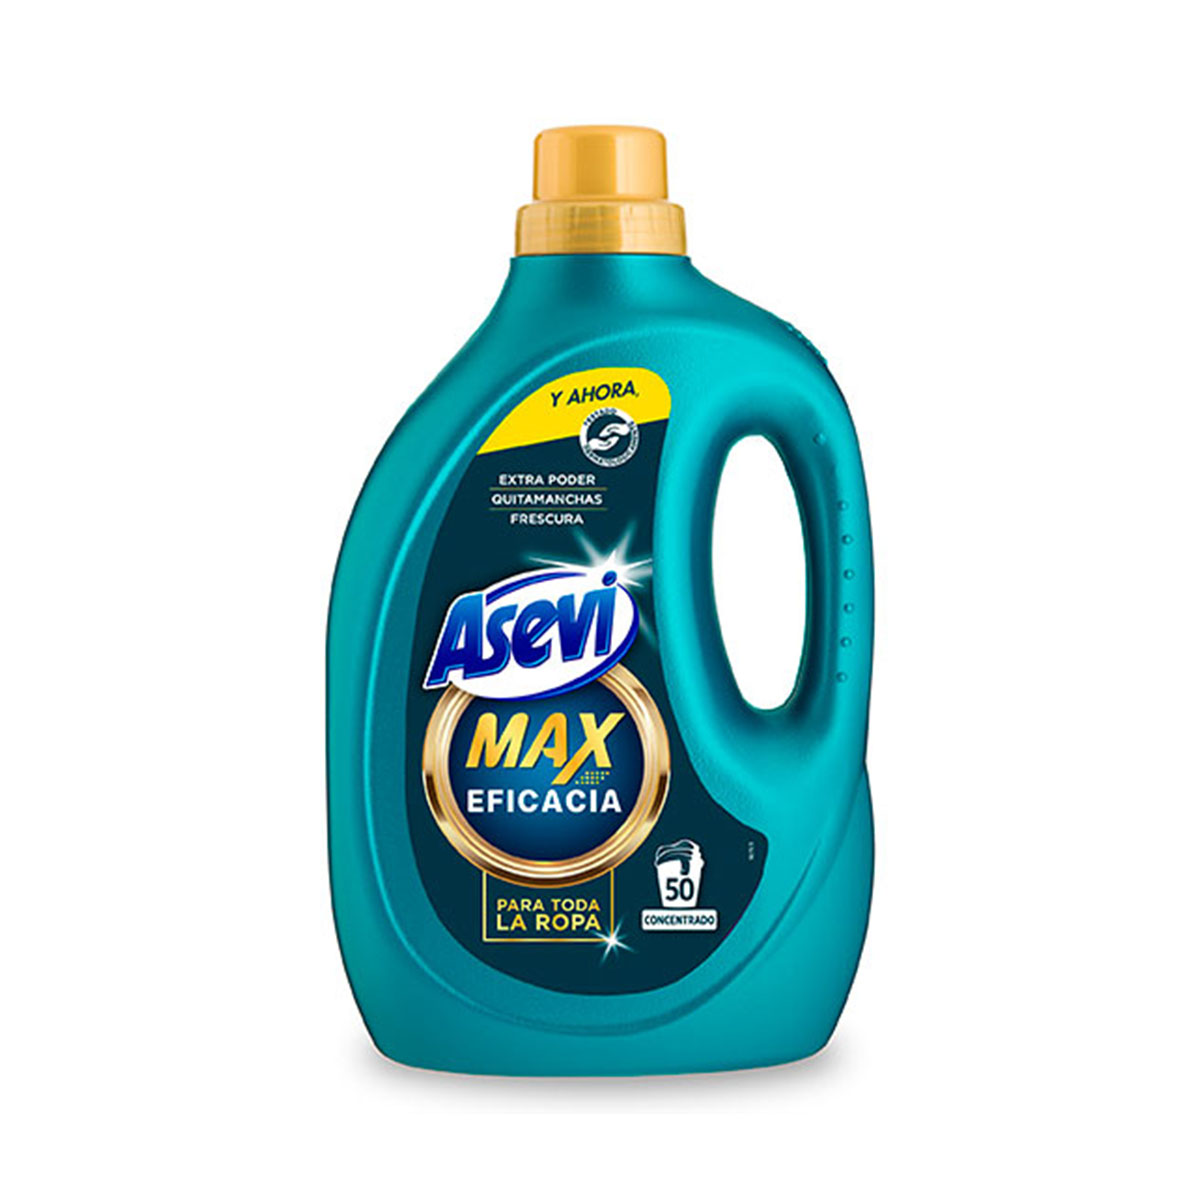 Do everything with my power Conversely Habubu Detergent Rufe Asevi Max Eficacia 50D - Magazin Online Asevi